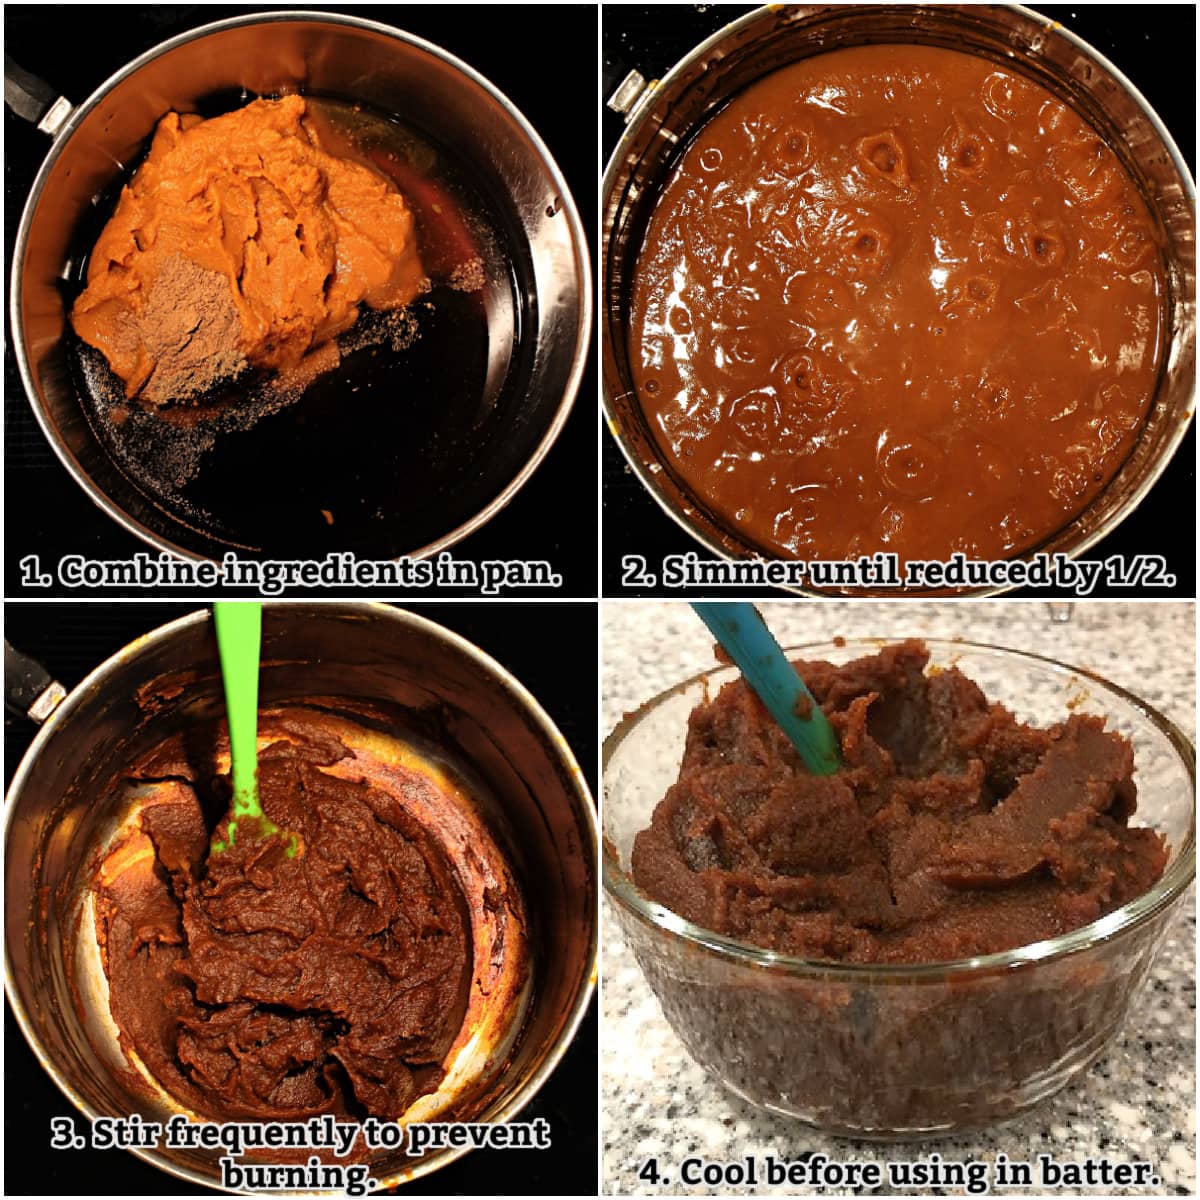 Pumpkin Butter instructions; combine ingredients in pan, simmer until reduced by ½, stir frequently, cool.